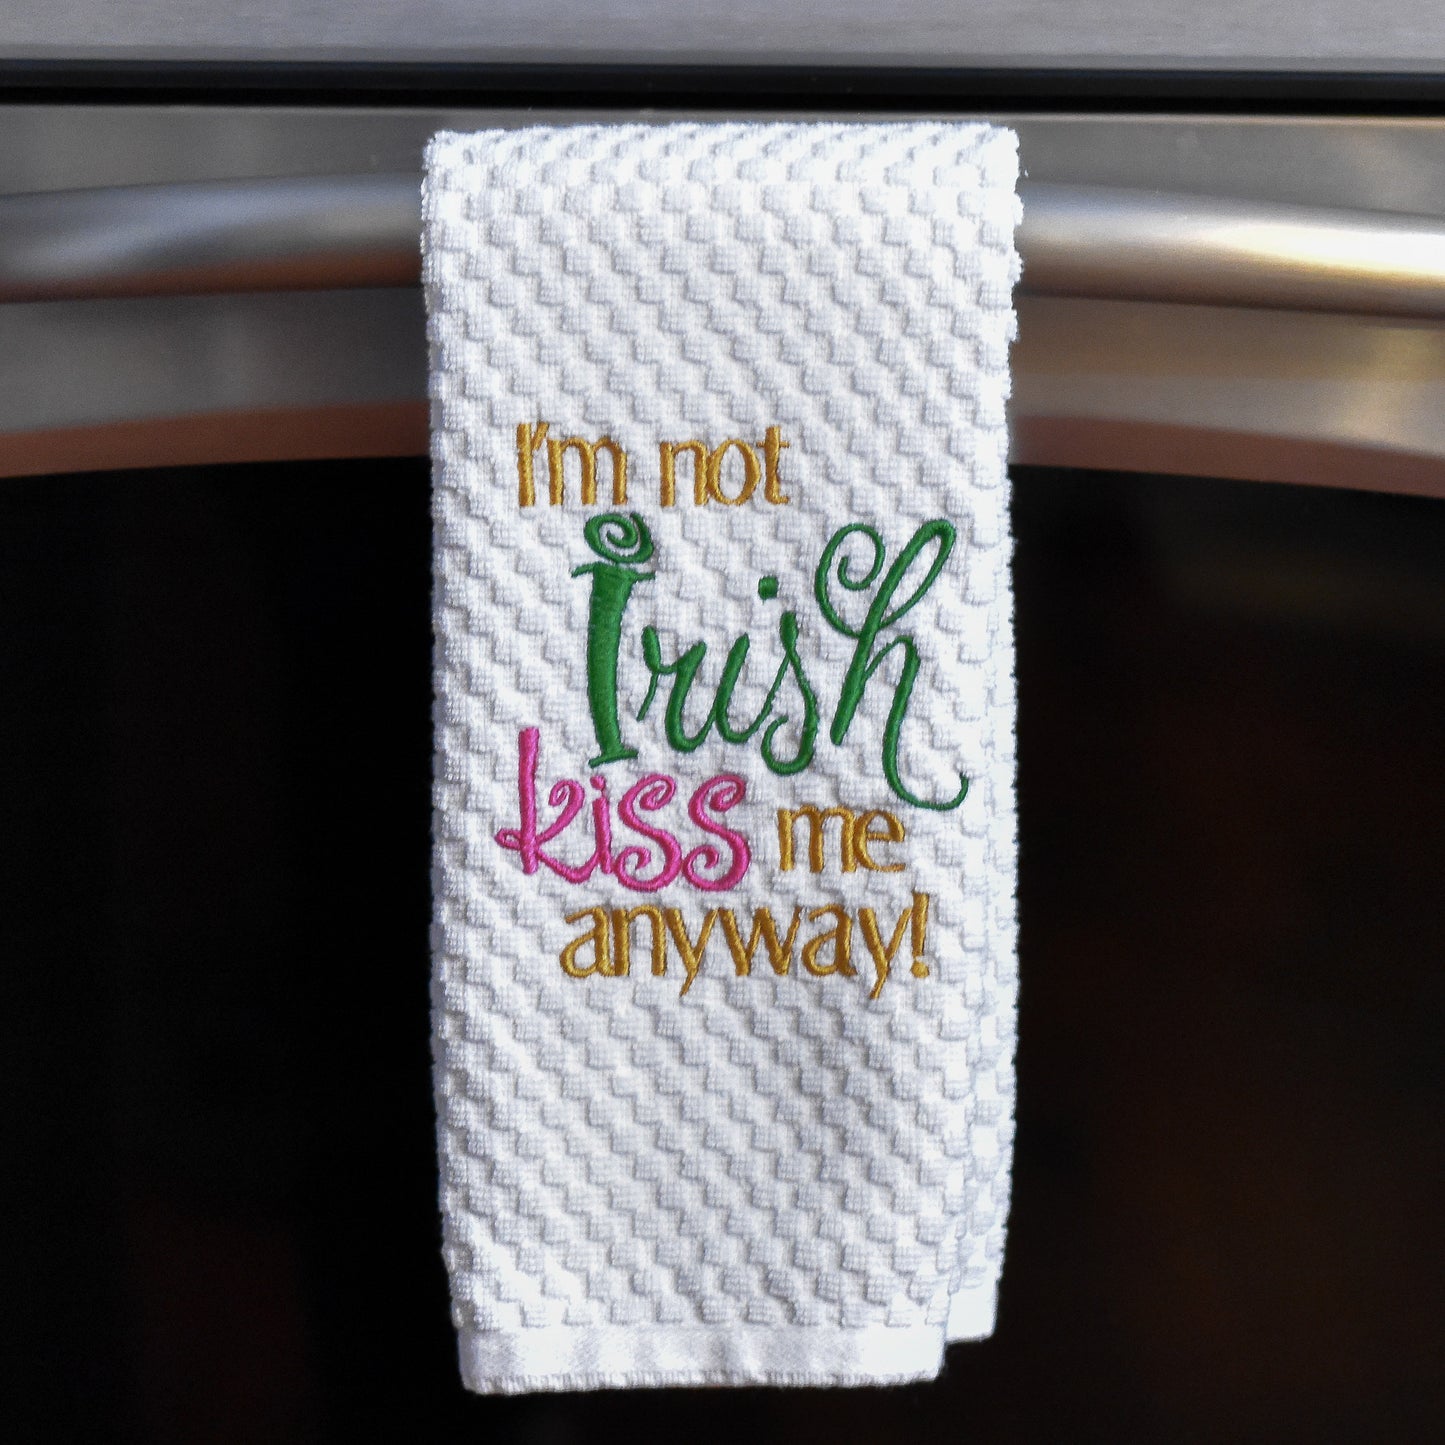 I'm Not Irish Kiss Me Anyway Towel - Embroidered